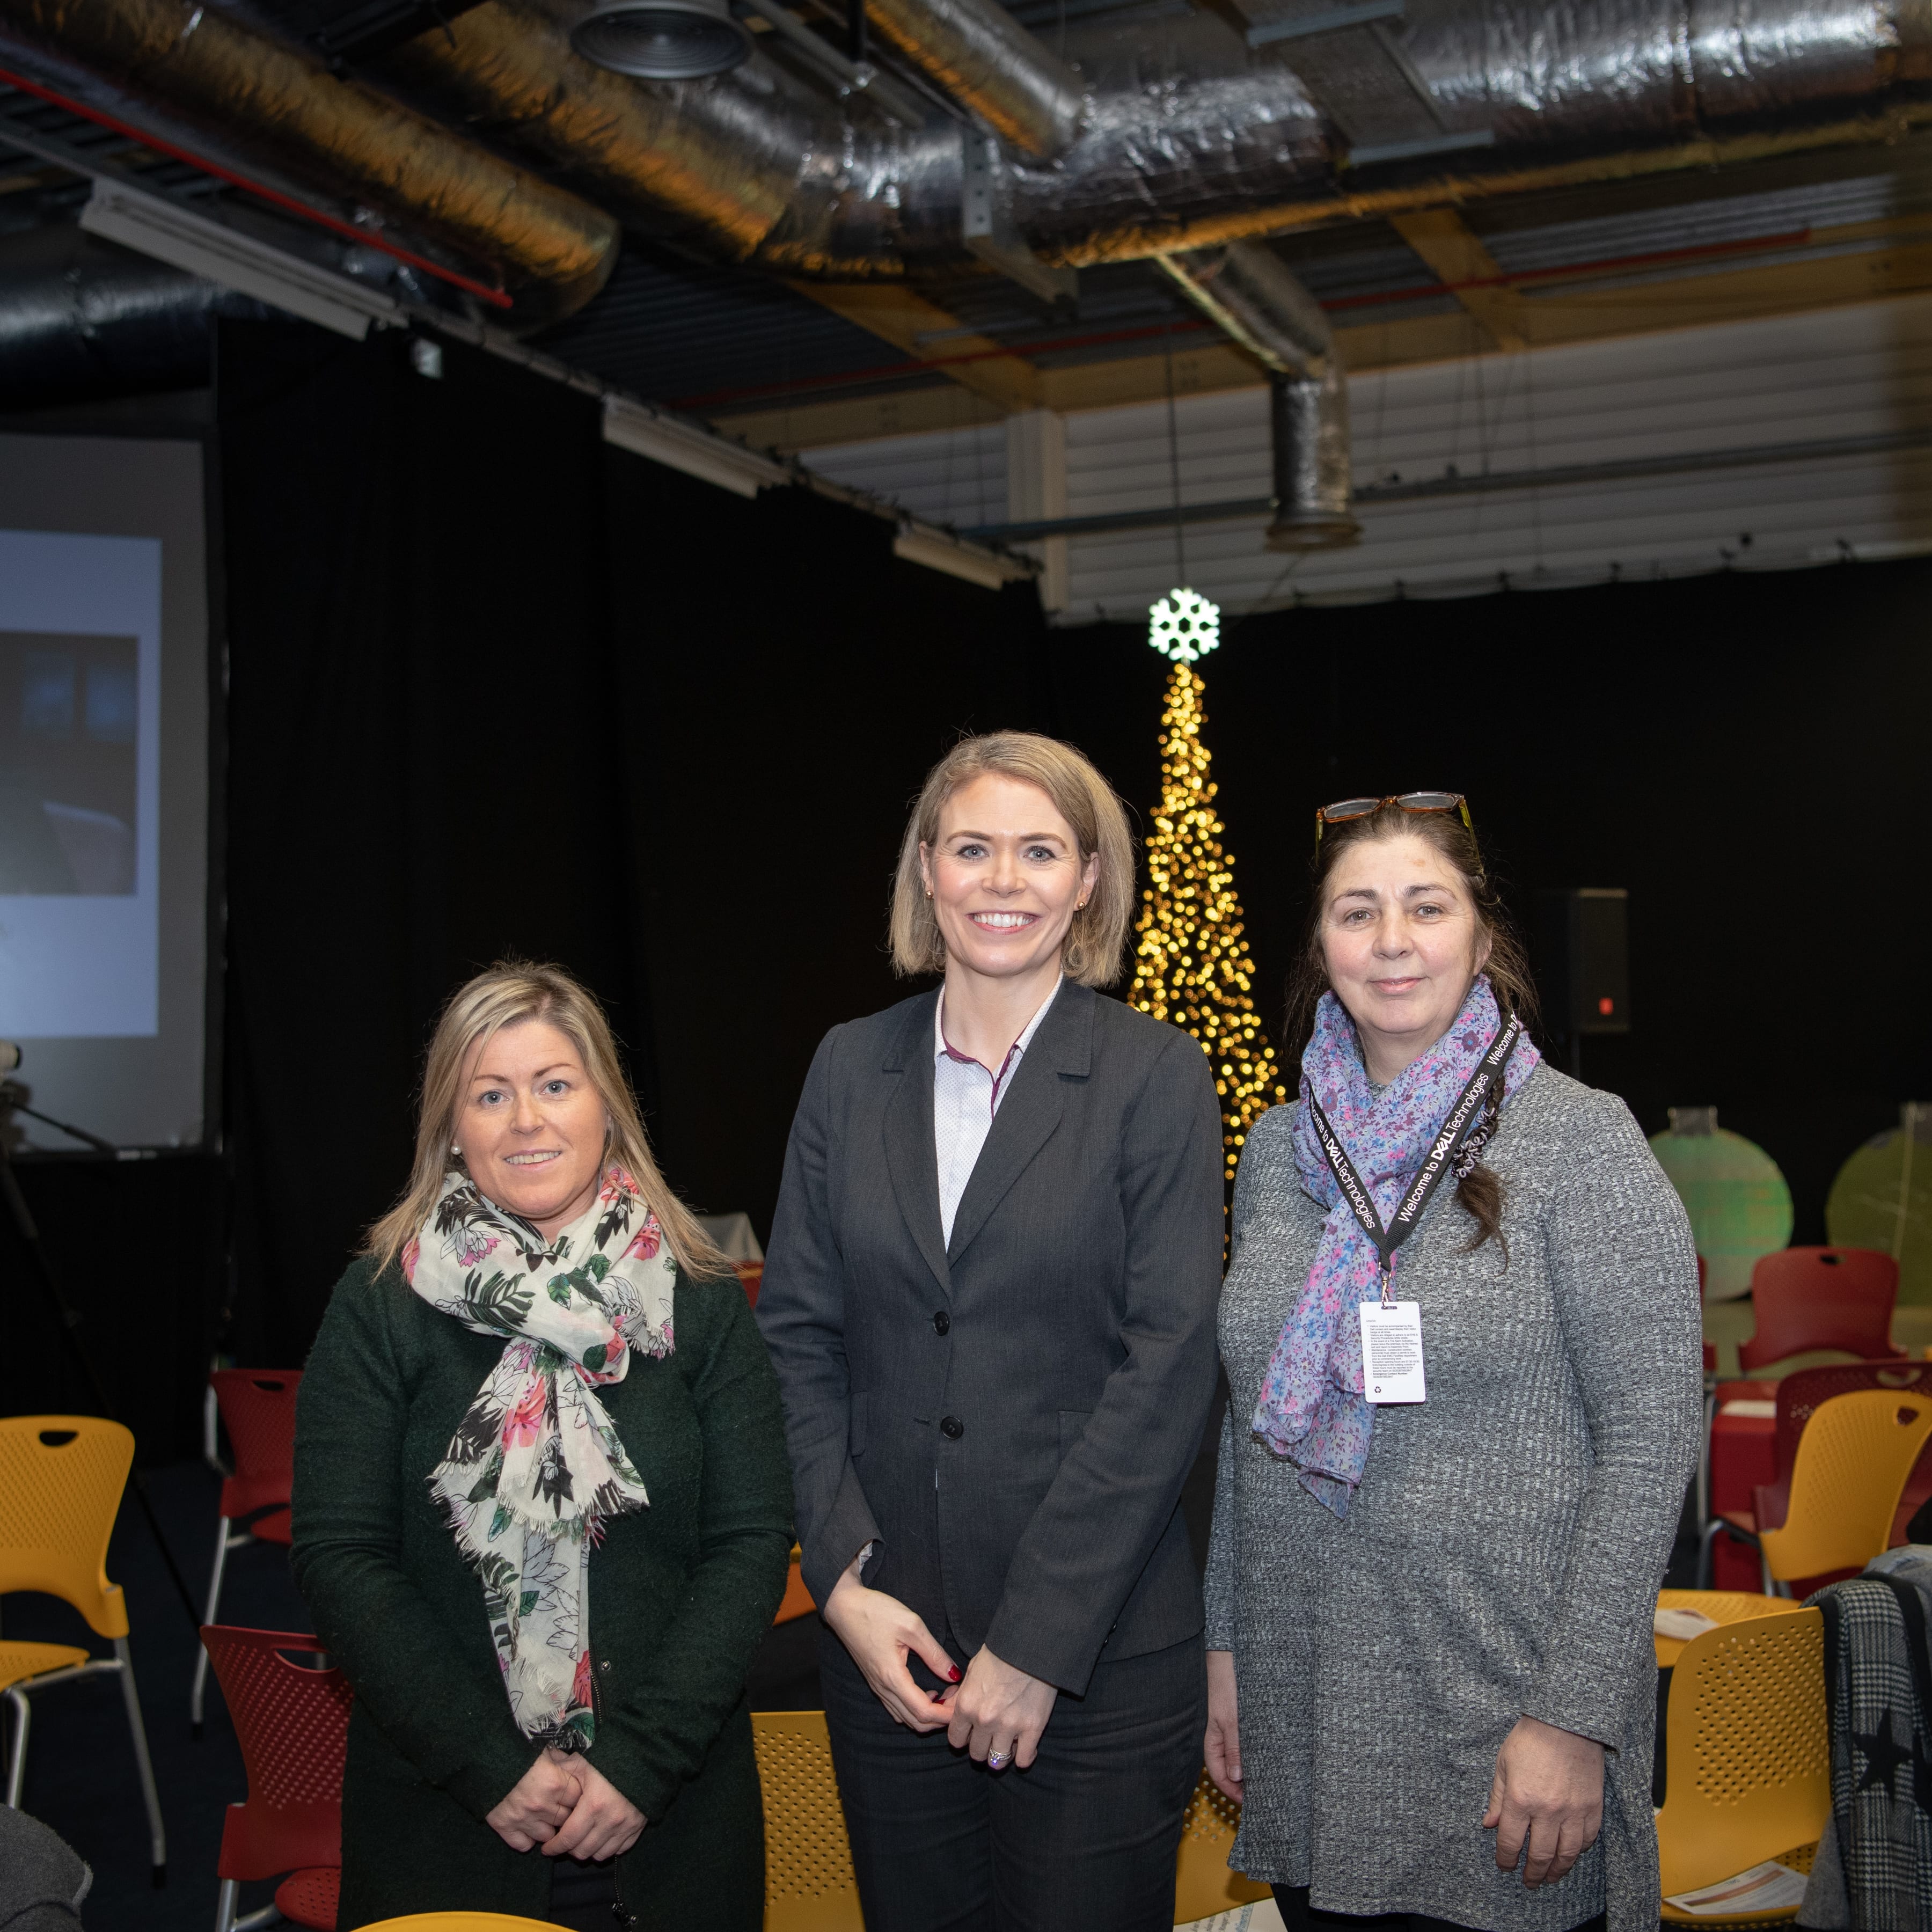 No repro fee- Regional Leaders Programme which took place on 11 December in Dell EMC, Guest speaker Eleanor McEvoy - From Left to Right: Deirdre McGrath - AIB, Deirdre Tuohy - AIB, Áine Ní Chonaill - NCEF
Photo credit Shauna Kennedy